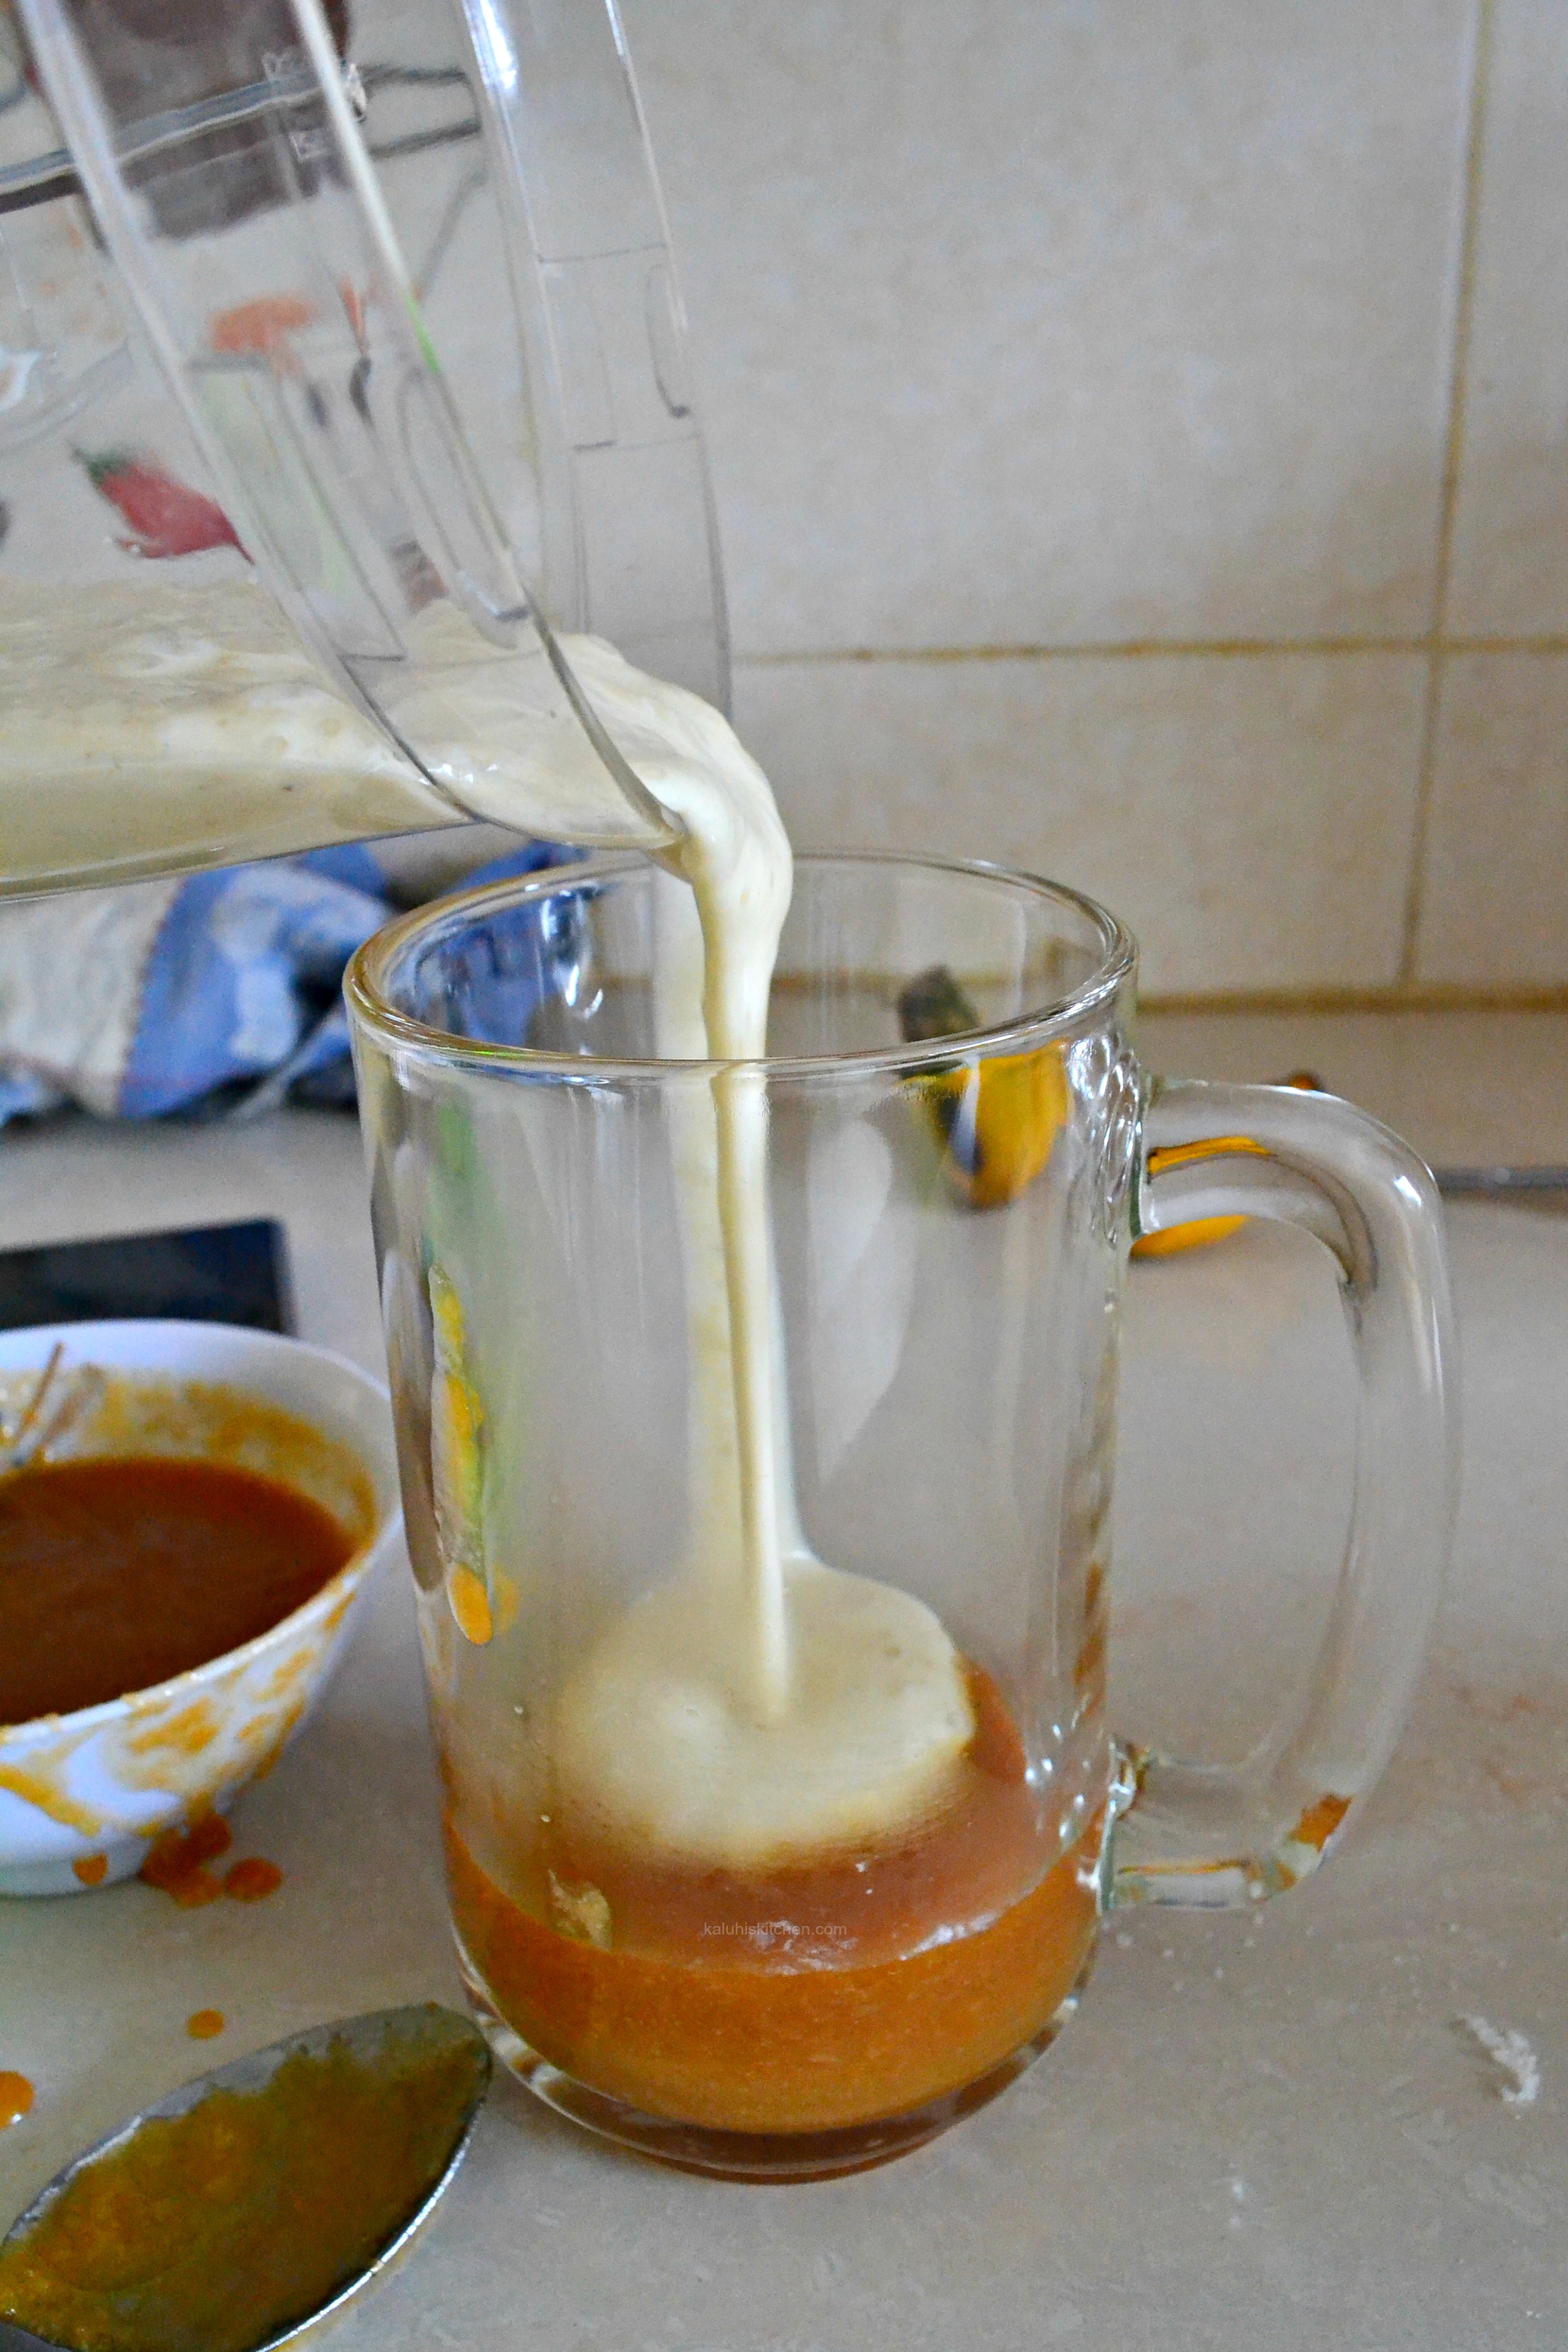 after-the-caramel-has-cooled-down-add-it-to-the-mug-first-followed-by-your-banana-milkshake_how-to-make-salted-caramel-banana-milkshake_kaluhiskitchen-com